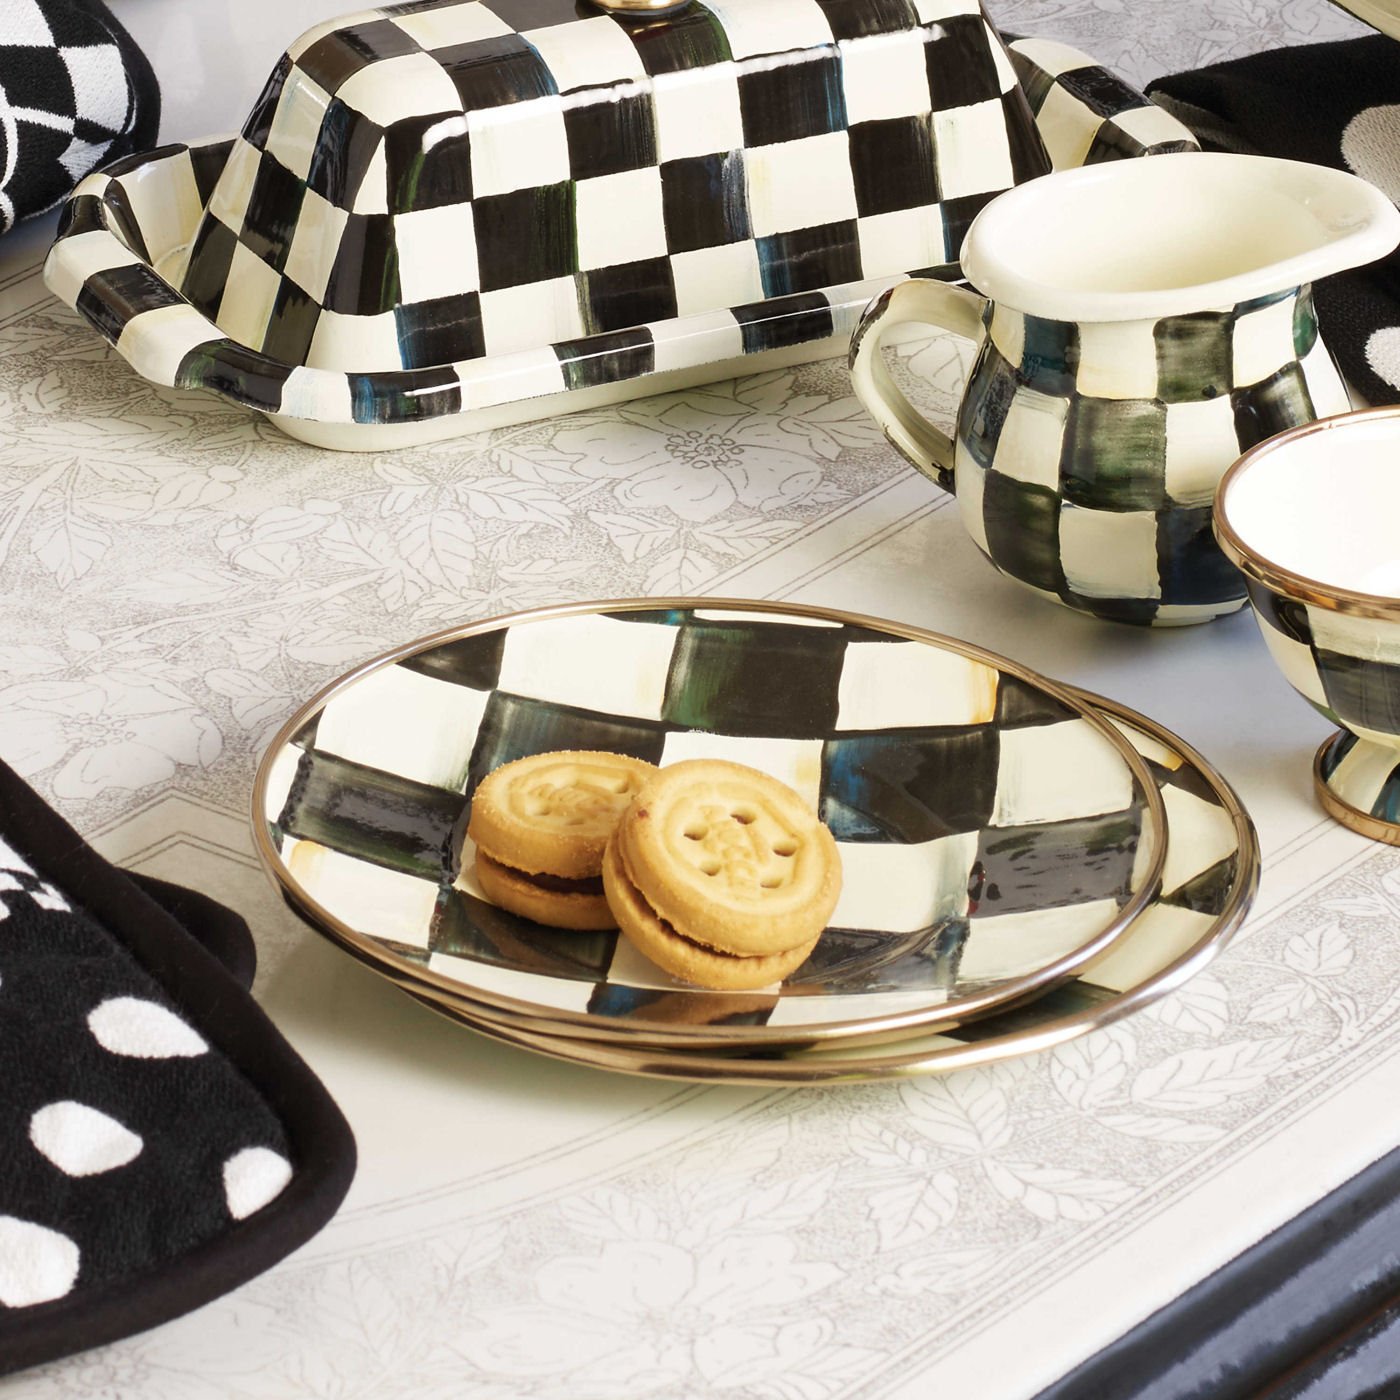 Courtly Check Saucer by MacKenzie-Childs - |VESIMI Design|